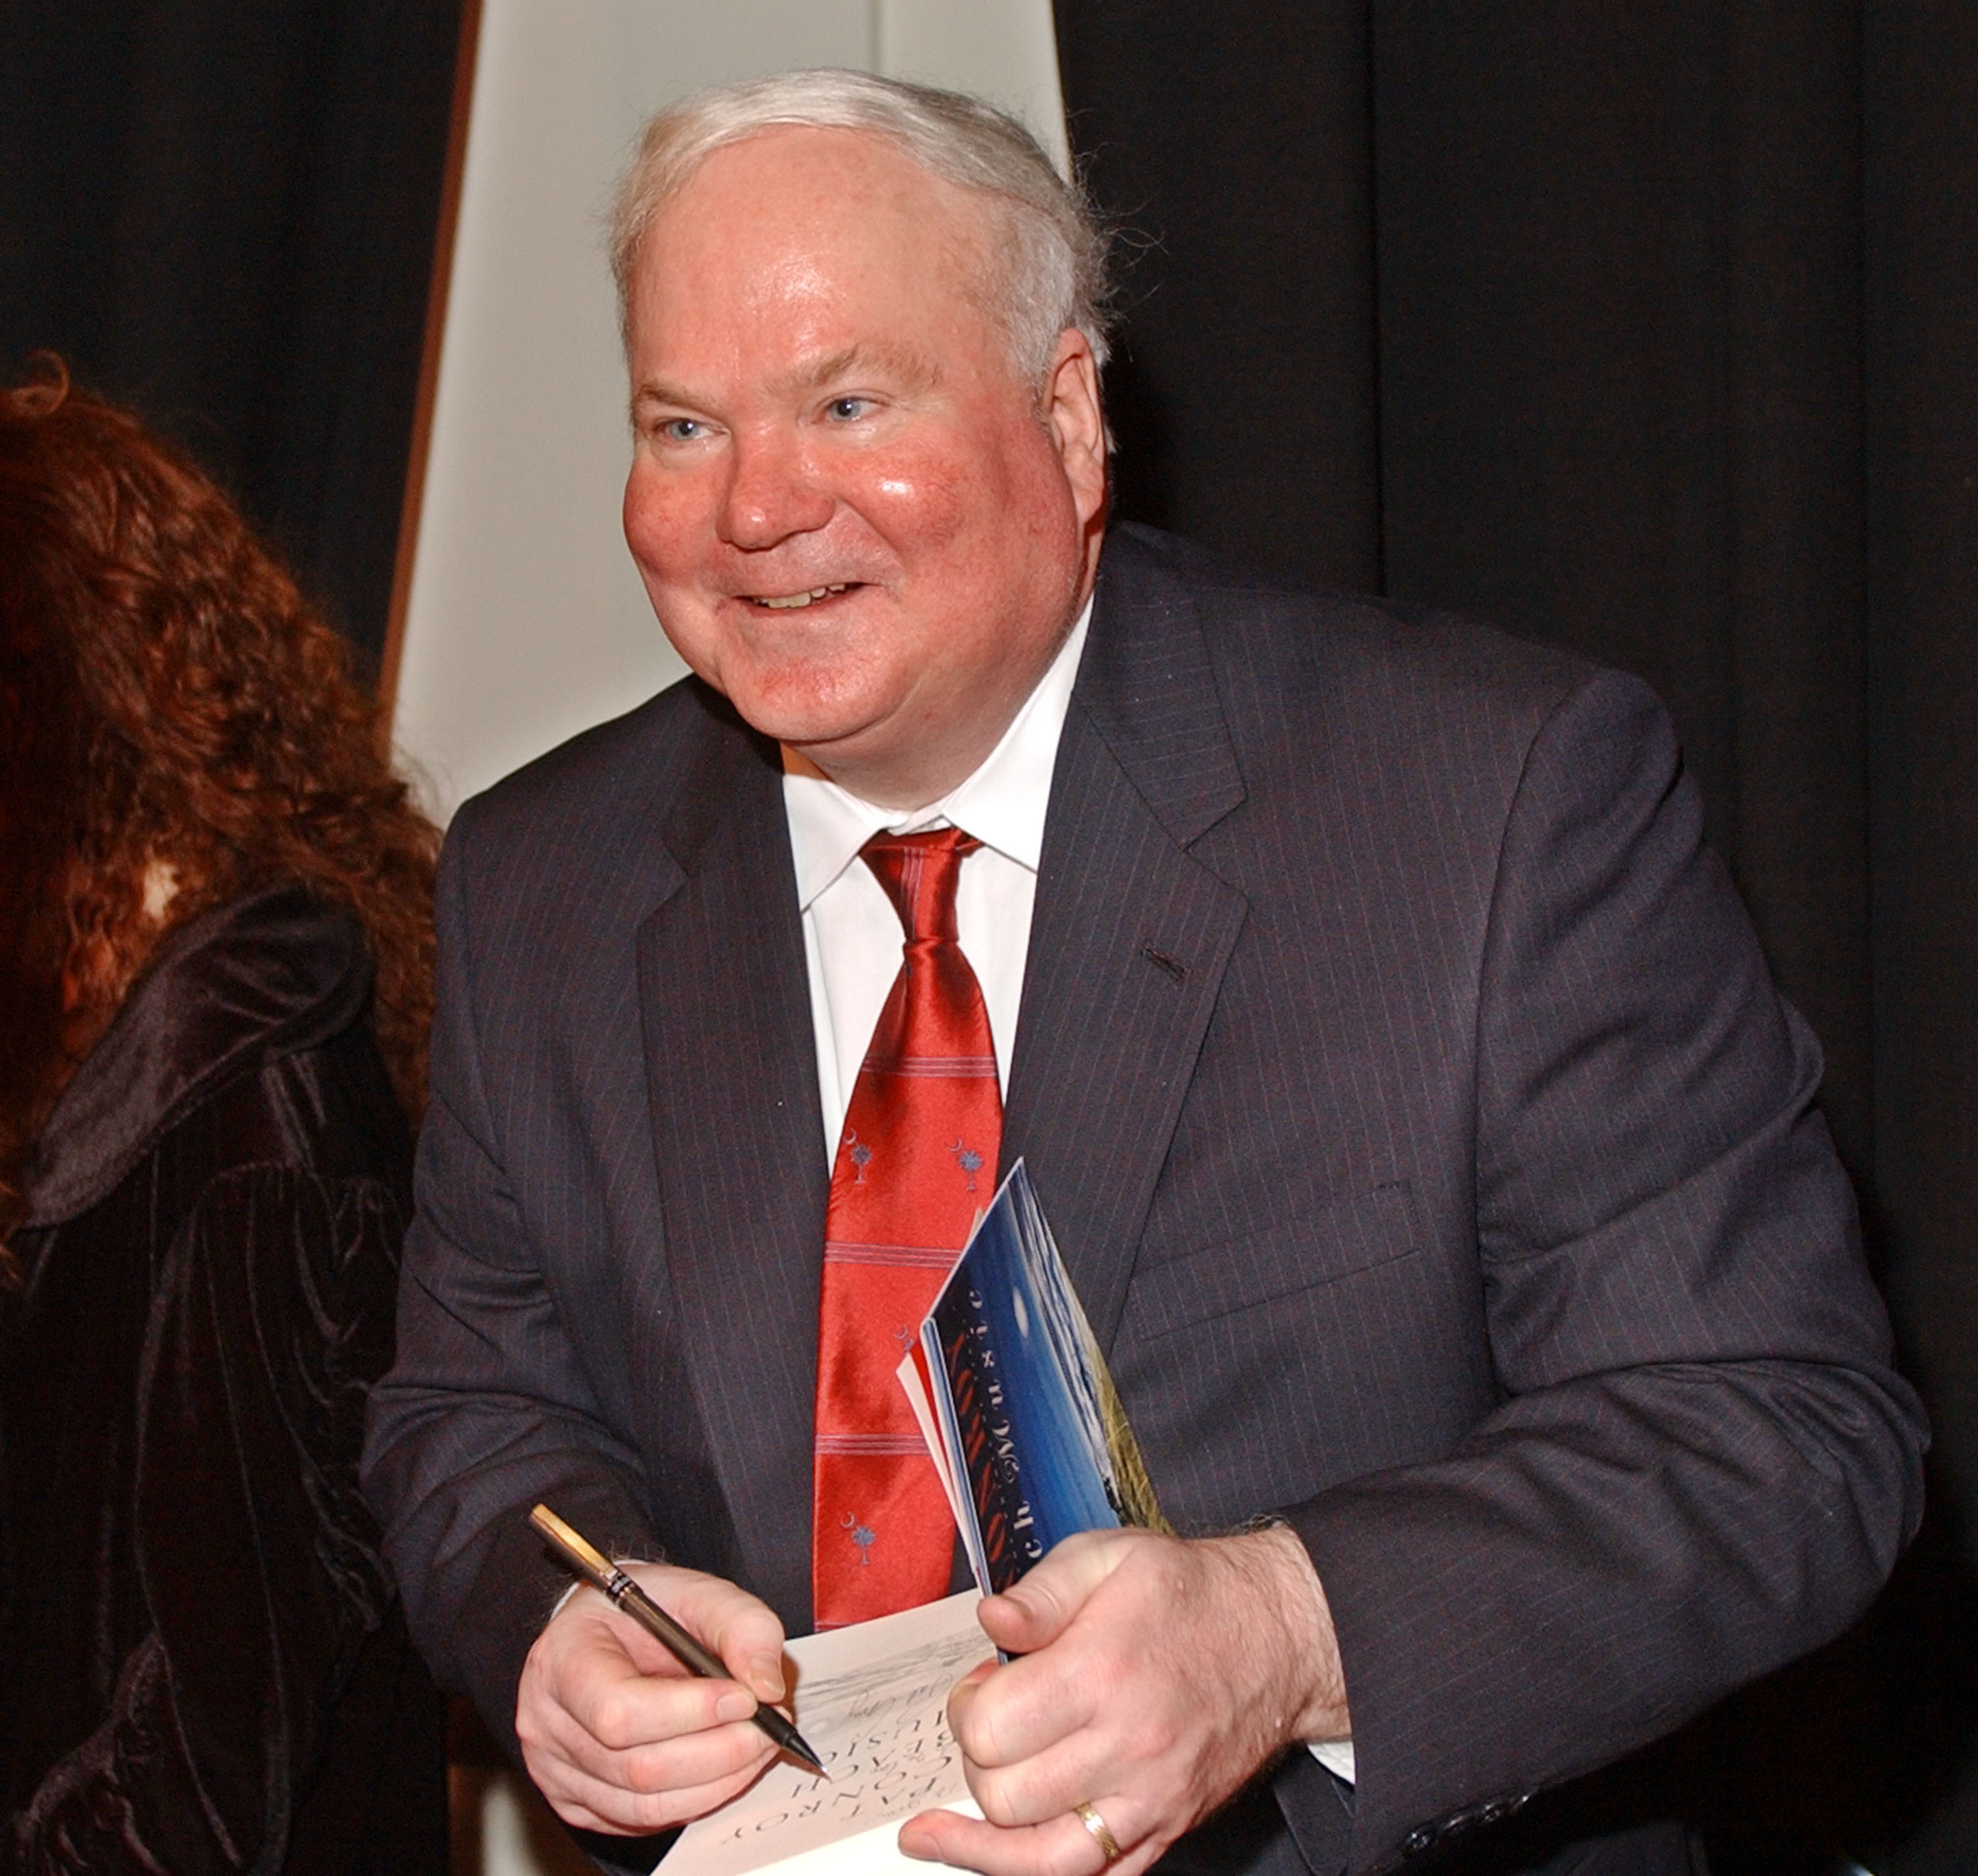 Pat Conroy, Author Of 'Prince of Tides,' Dies At 70